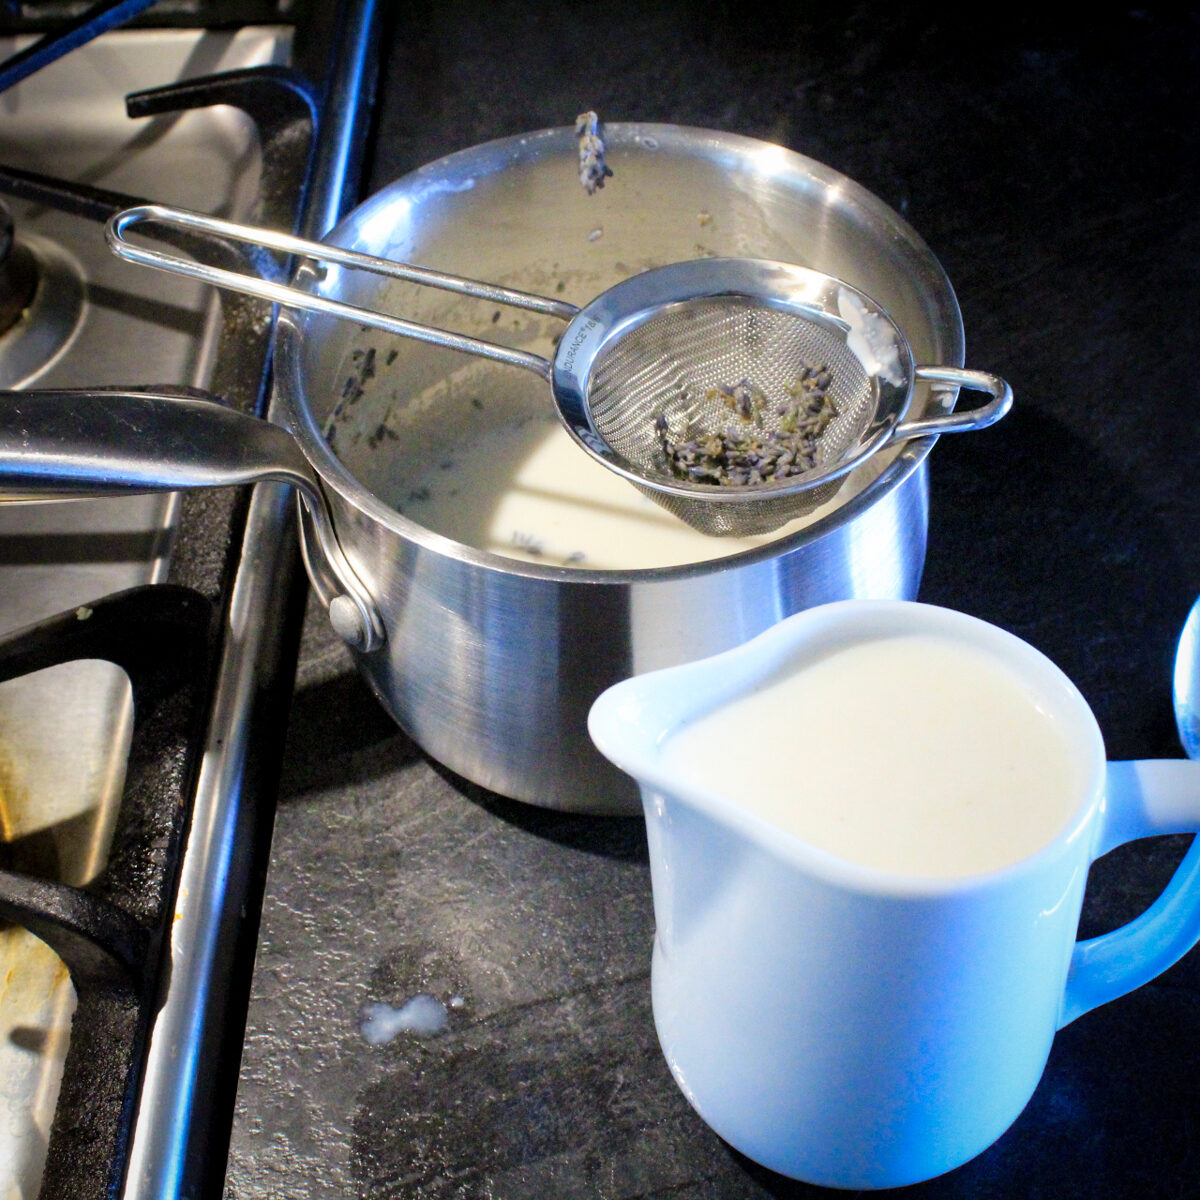 Strained milk tea is in a small white ceramic pitcher. The remaining lavender is in the tea strainer over the saucepan.